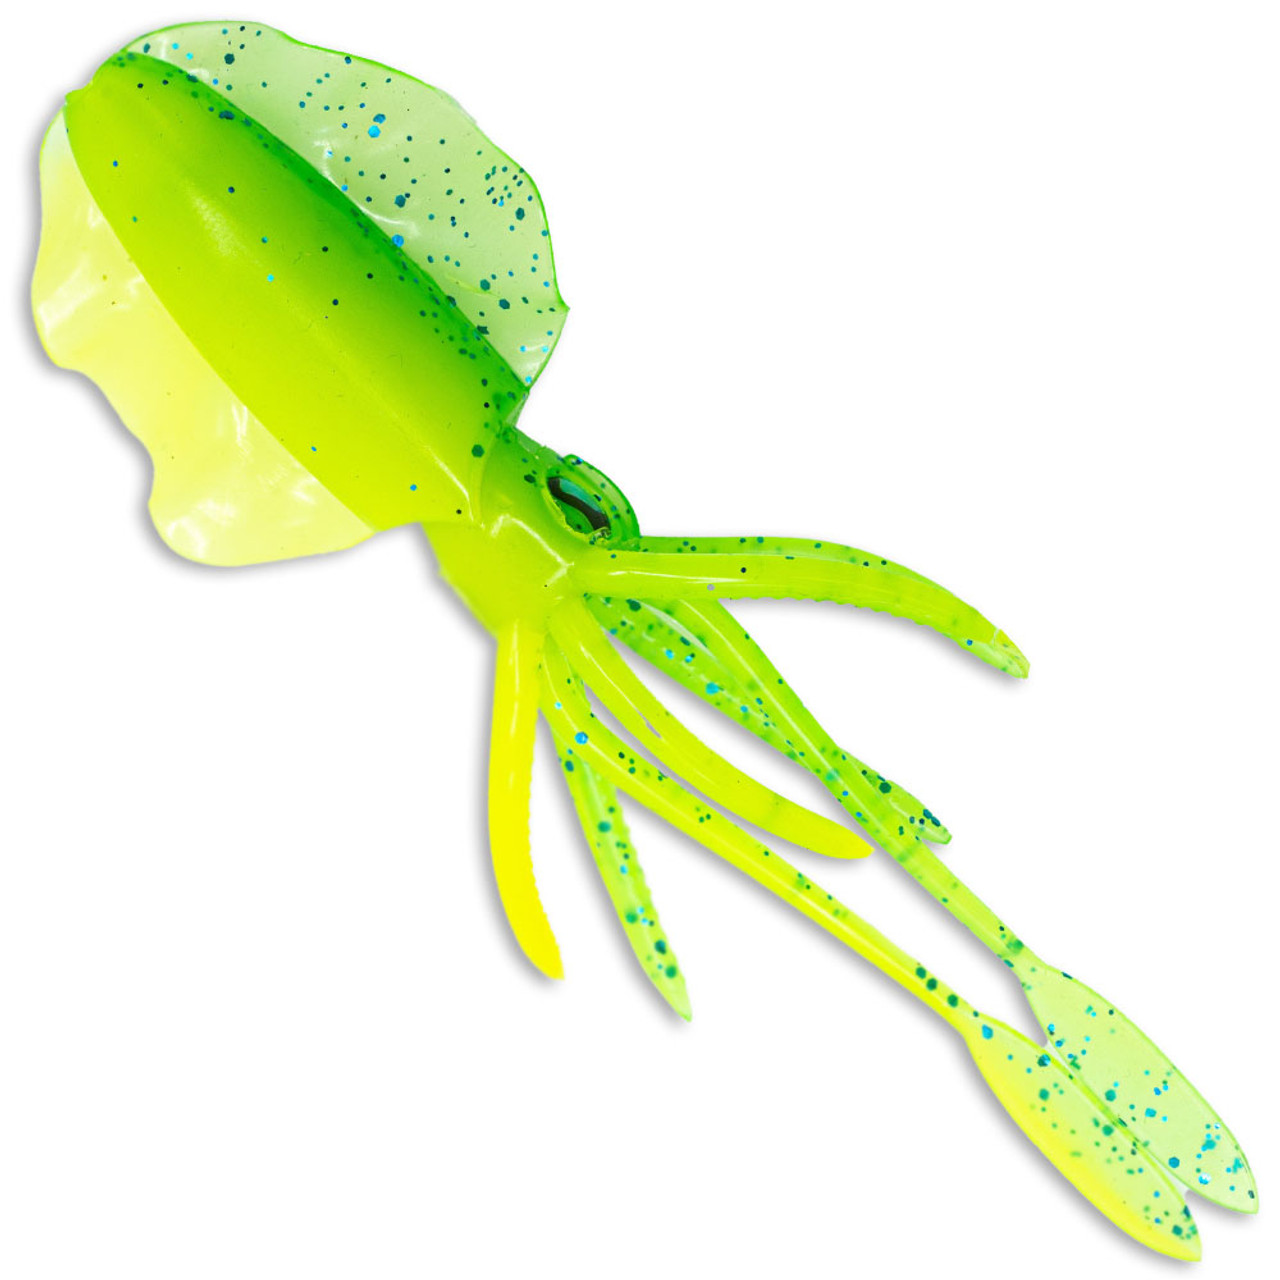 Chasebaits The Ultimate Squid Lures An Rigs Combo(200mm Size